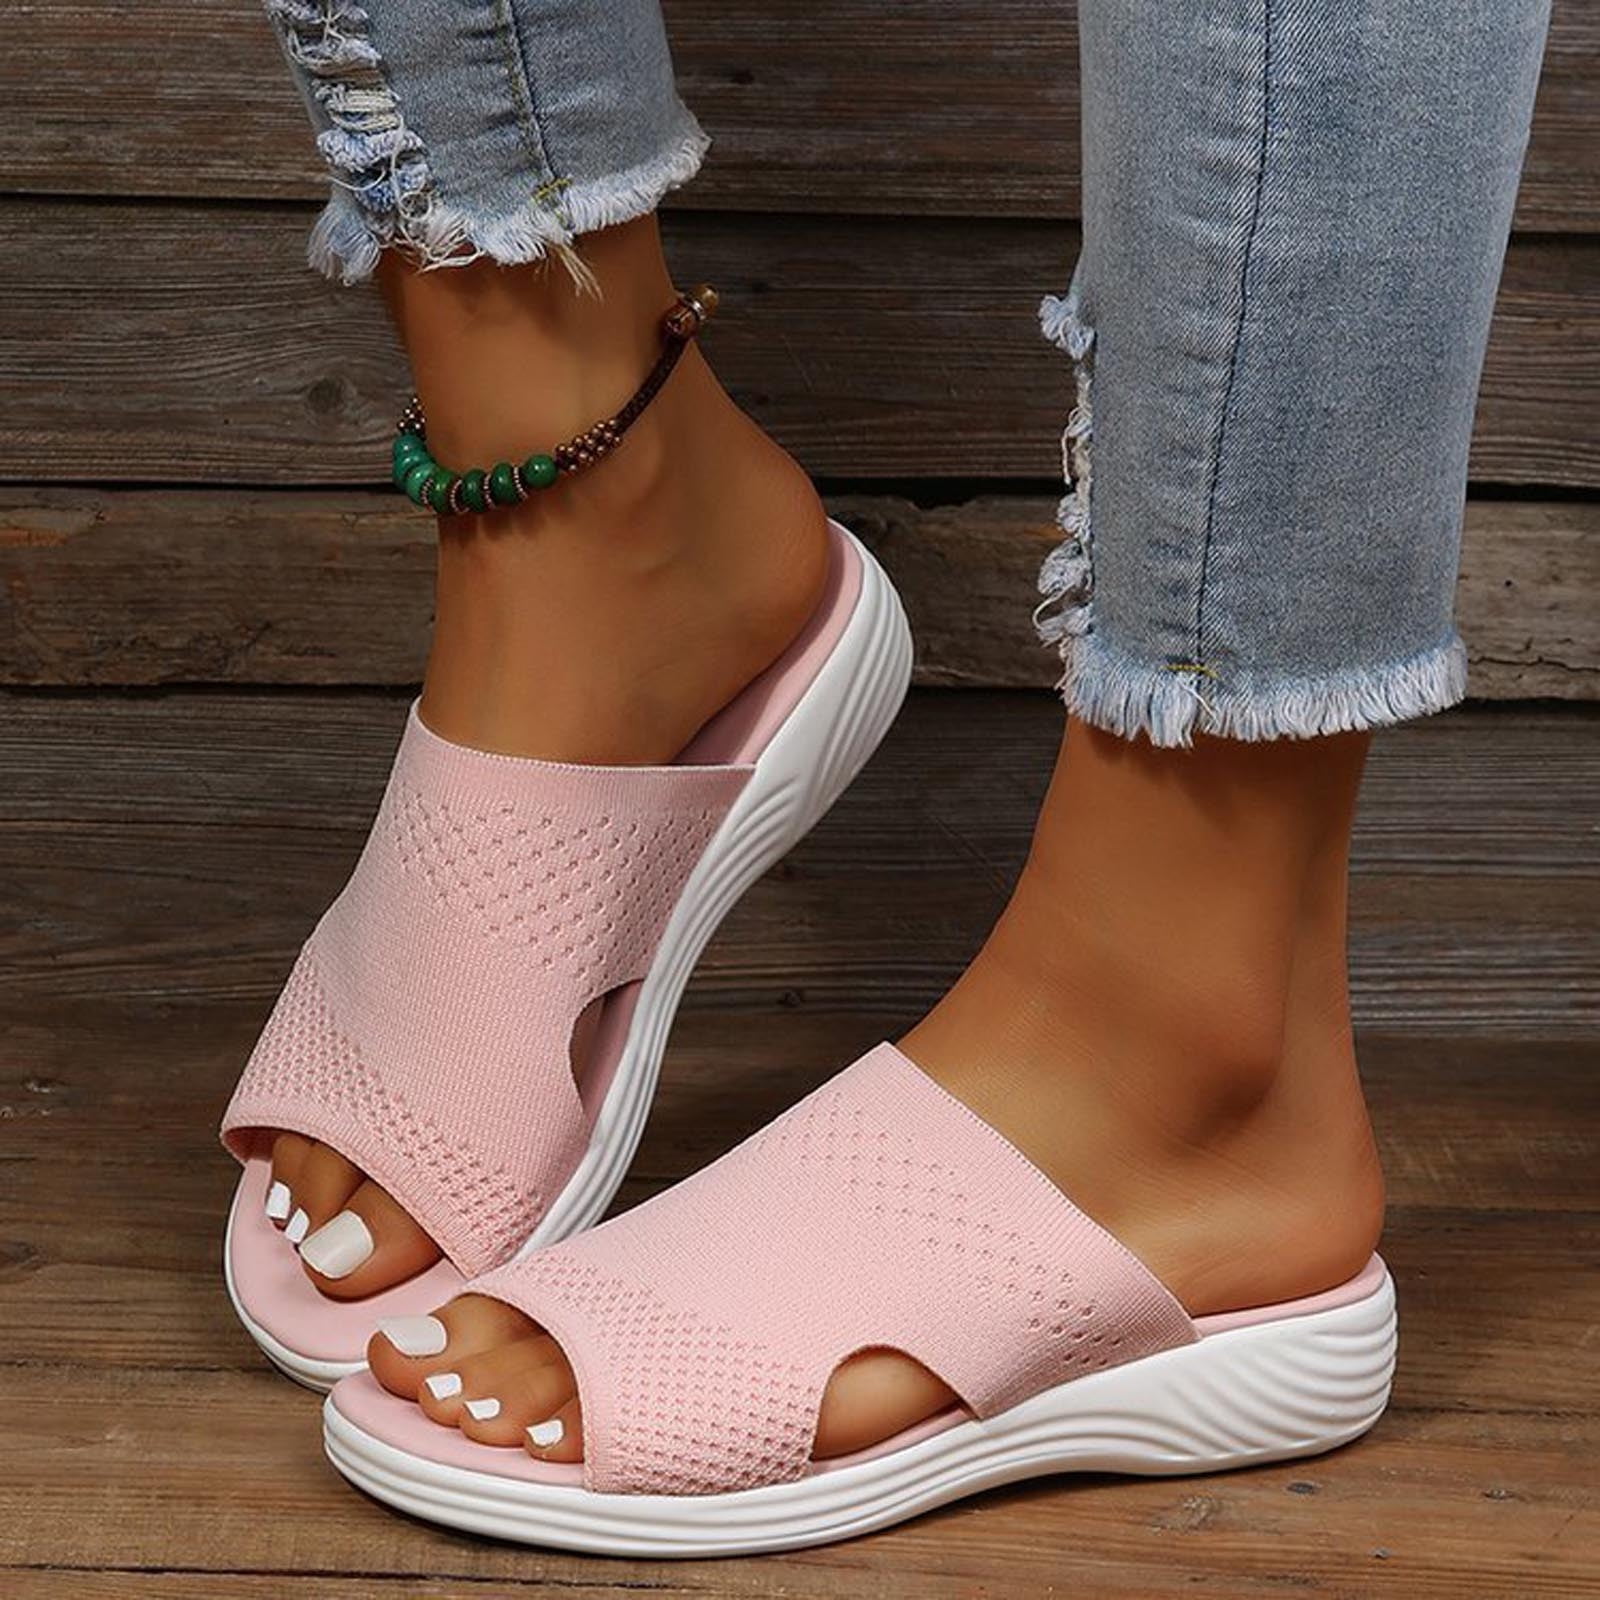 Bkolouuoe Womens Clog Sandals Fashion Women's Casual Shoes Breathable  Thick-soled Wedges Leisure Sandals Sandals for Women with Heels Summer